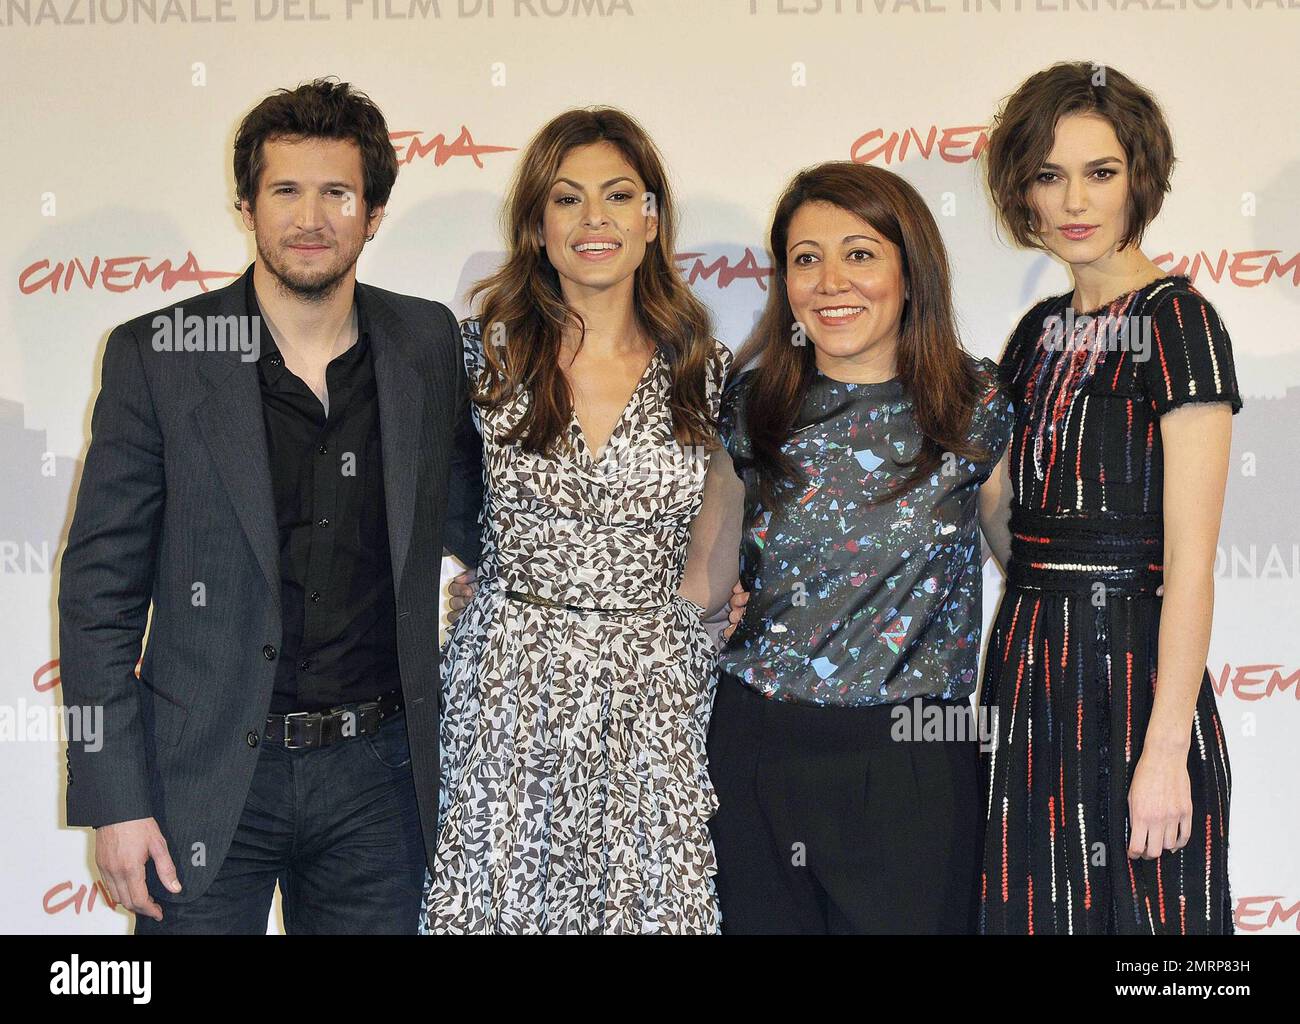 Actor Guillaume Canet, actress Eva Mendes, director Massy Tadjedin